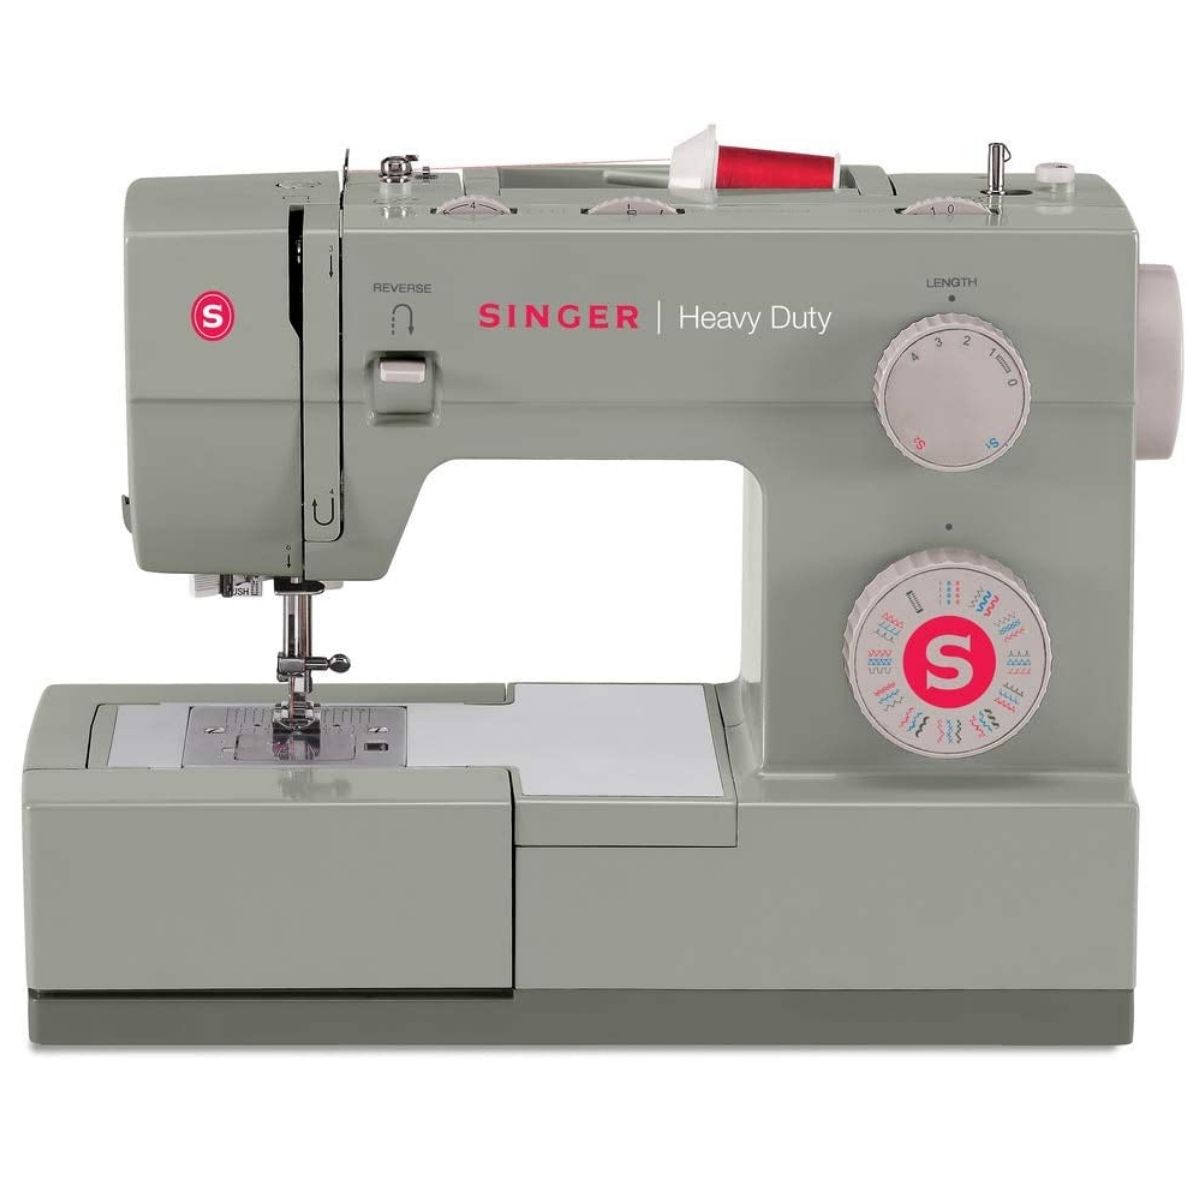 a picture of a gray singer heavy duty sewing machine. The machine has two large dials on the front with red, white and gray letters and markings